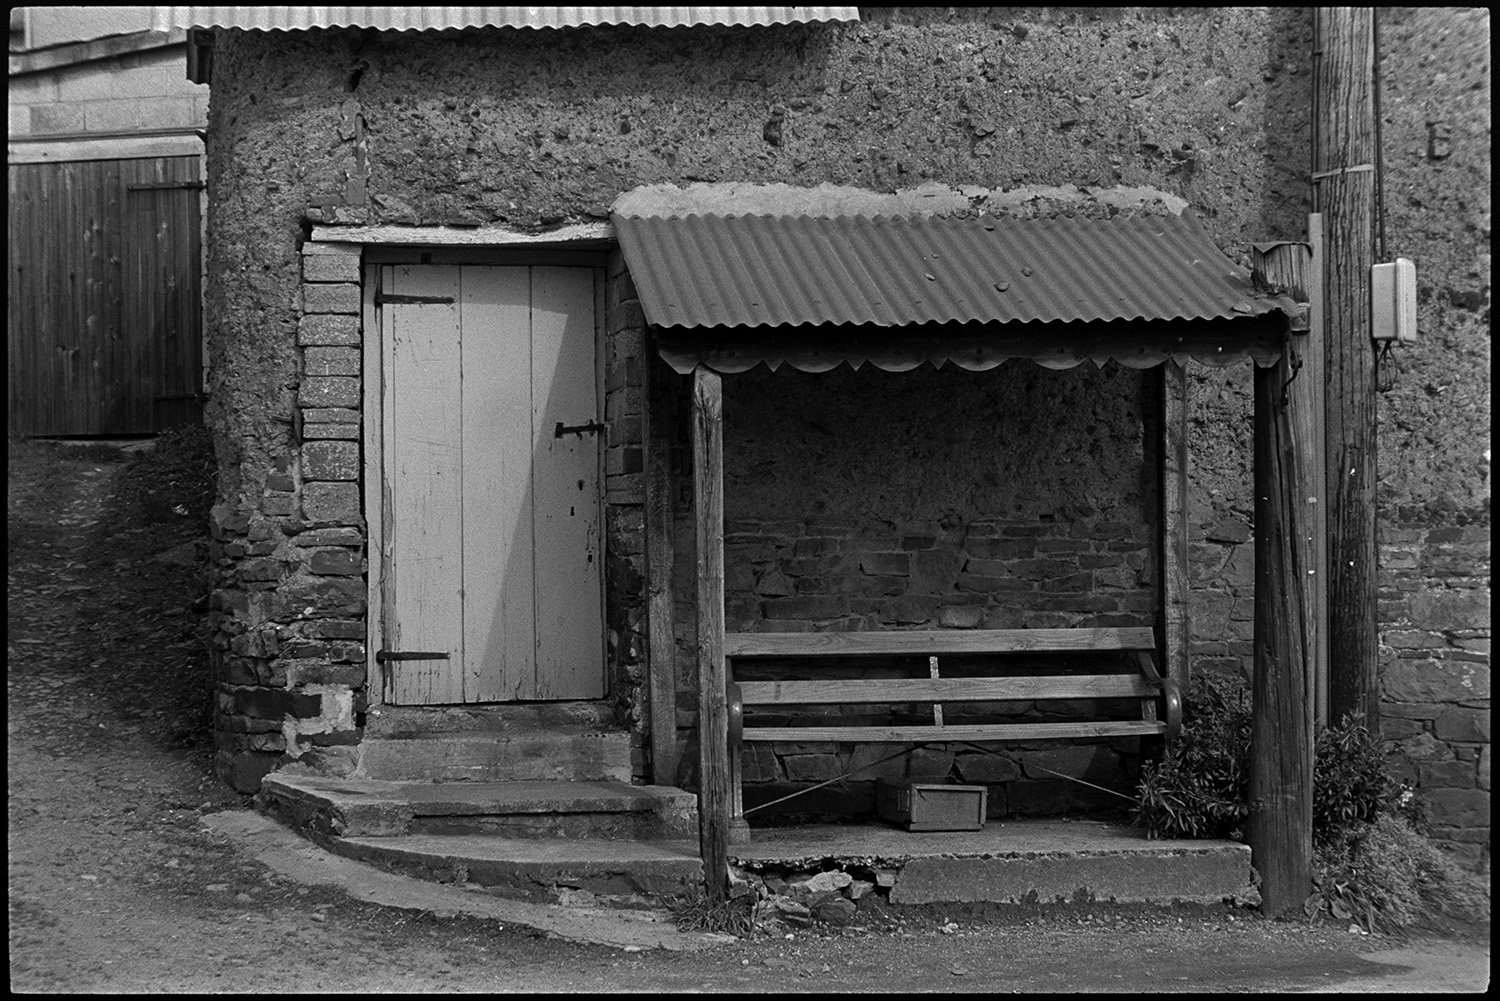 Street scenes, public bench.
[A public bench with wooden supports and a corrugated iron roof on a street corner in Chulmleigh. The shelter is attached to a cob barn with steps leading up to a wooden door.]